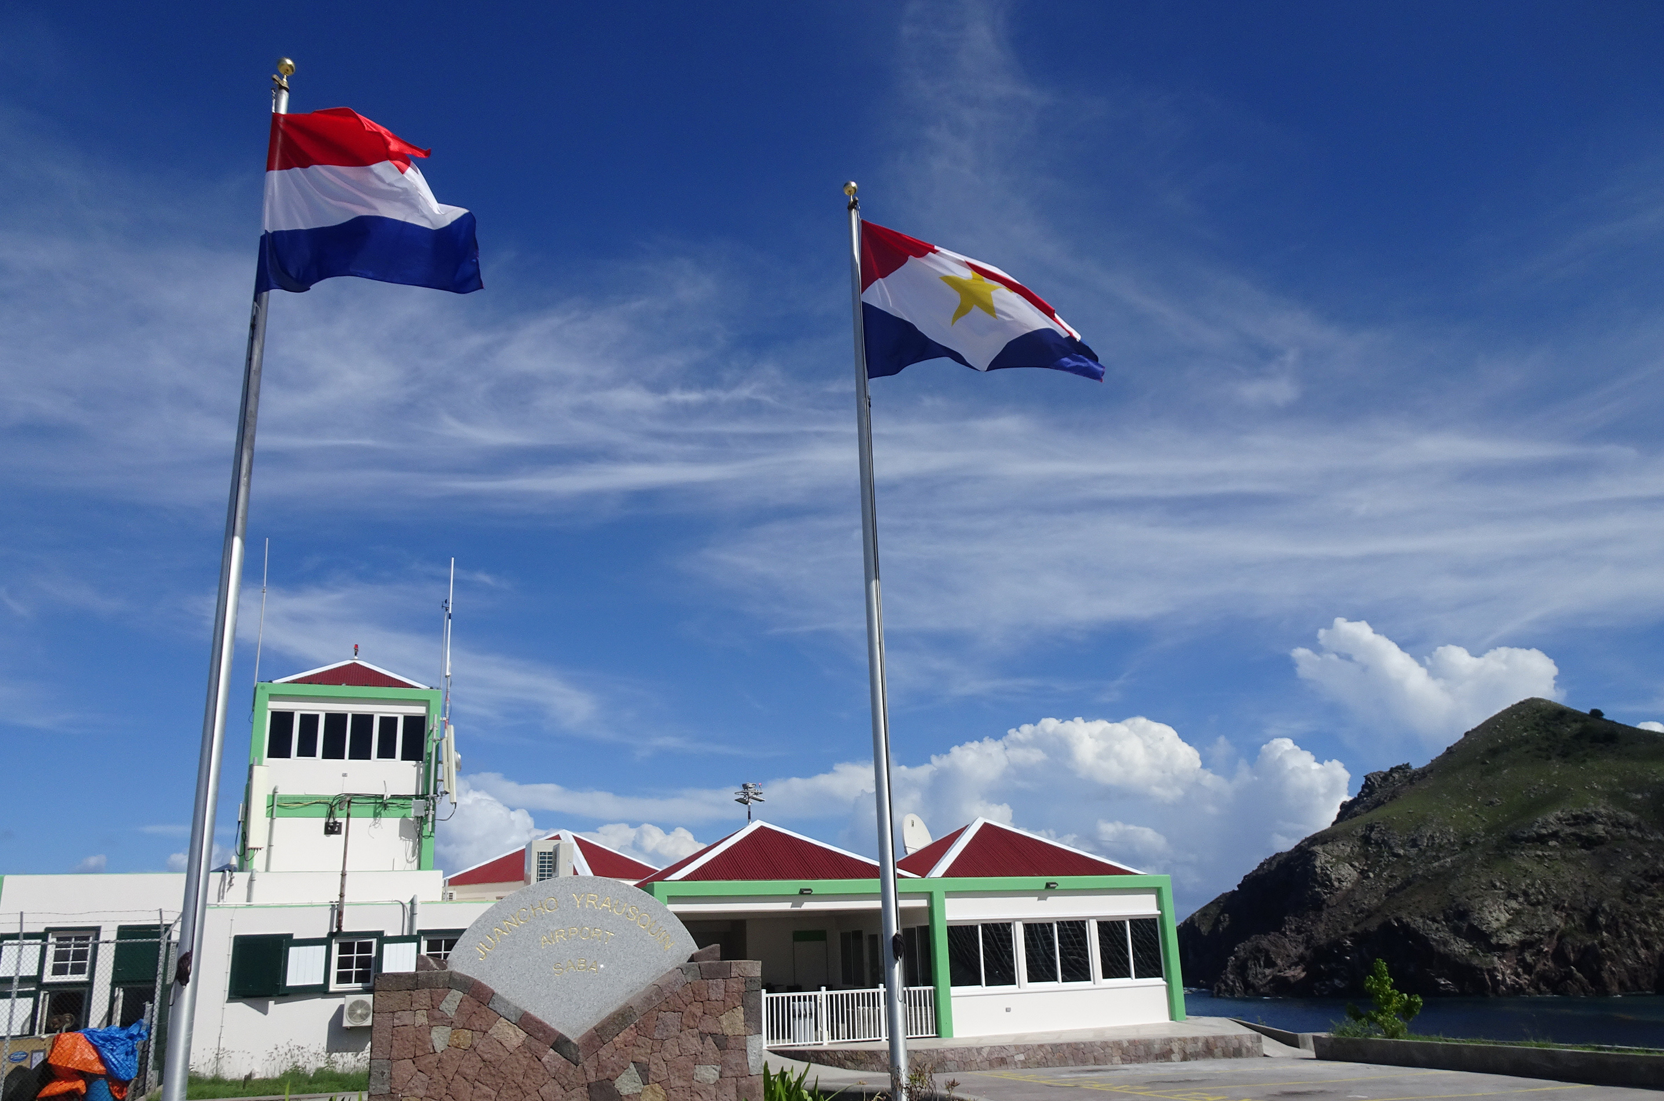 Saba tightens rules from Travelers from Curaçao, Aruba and St. Maarten